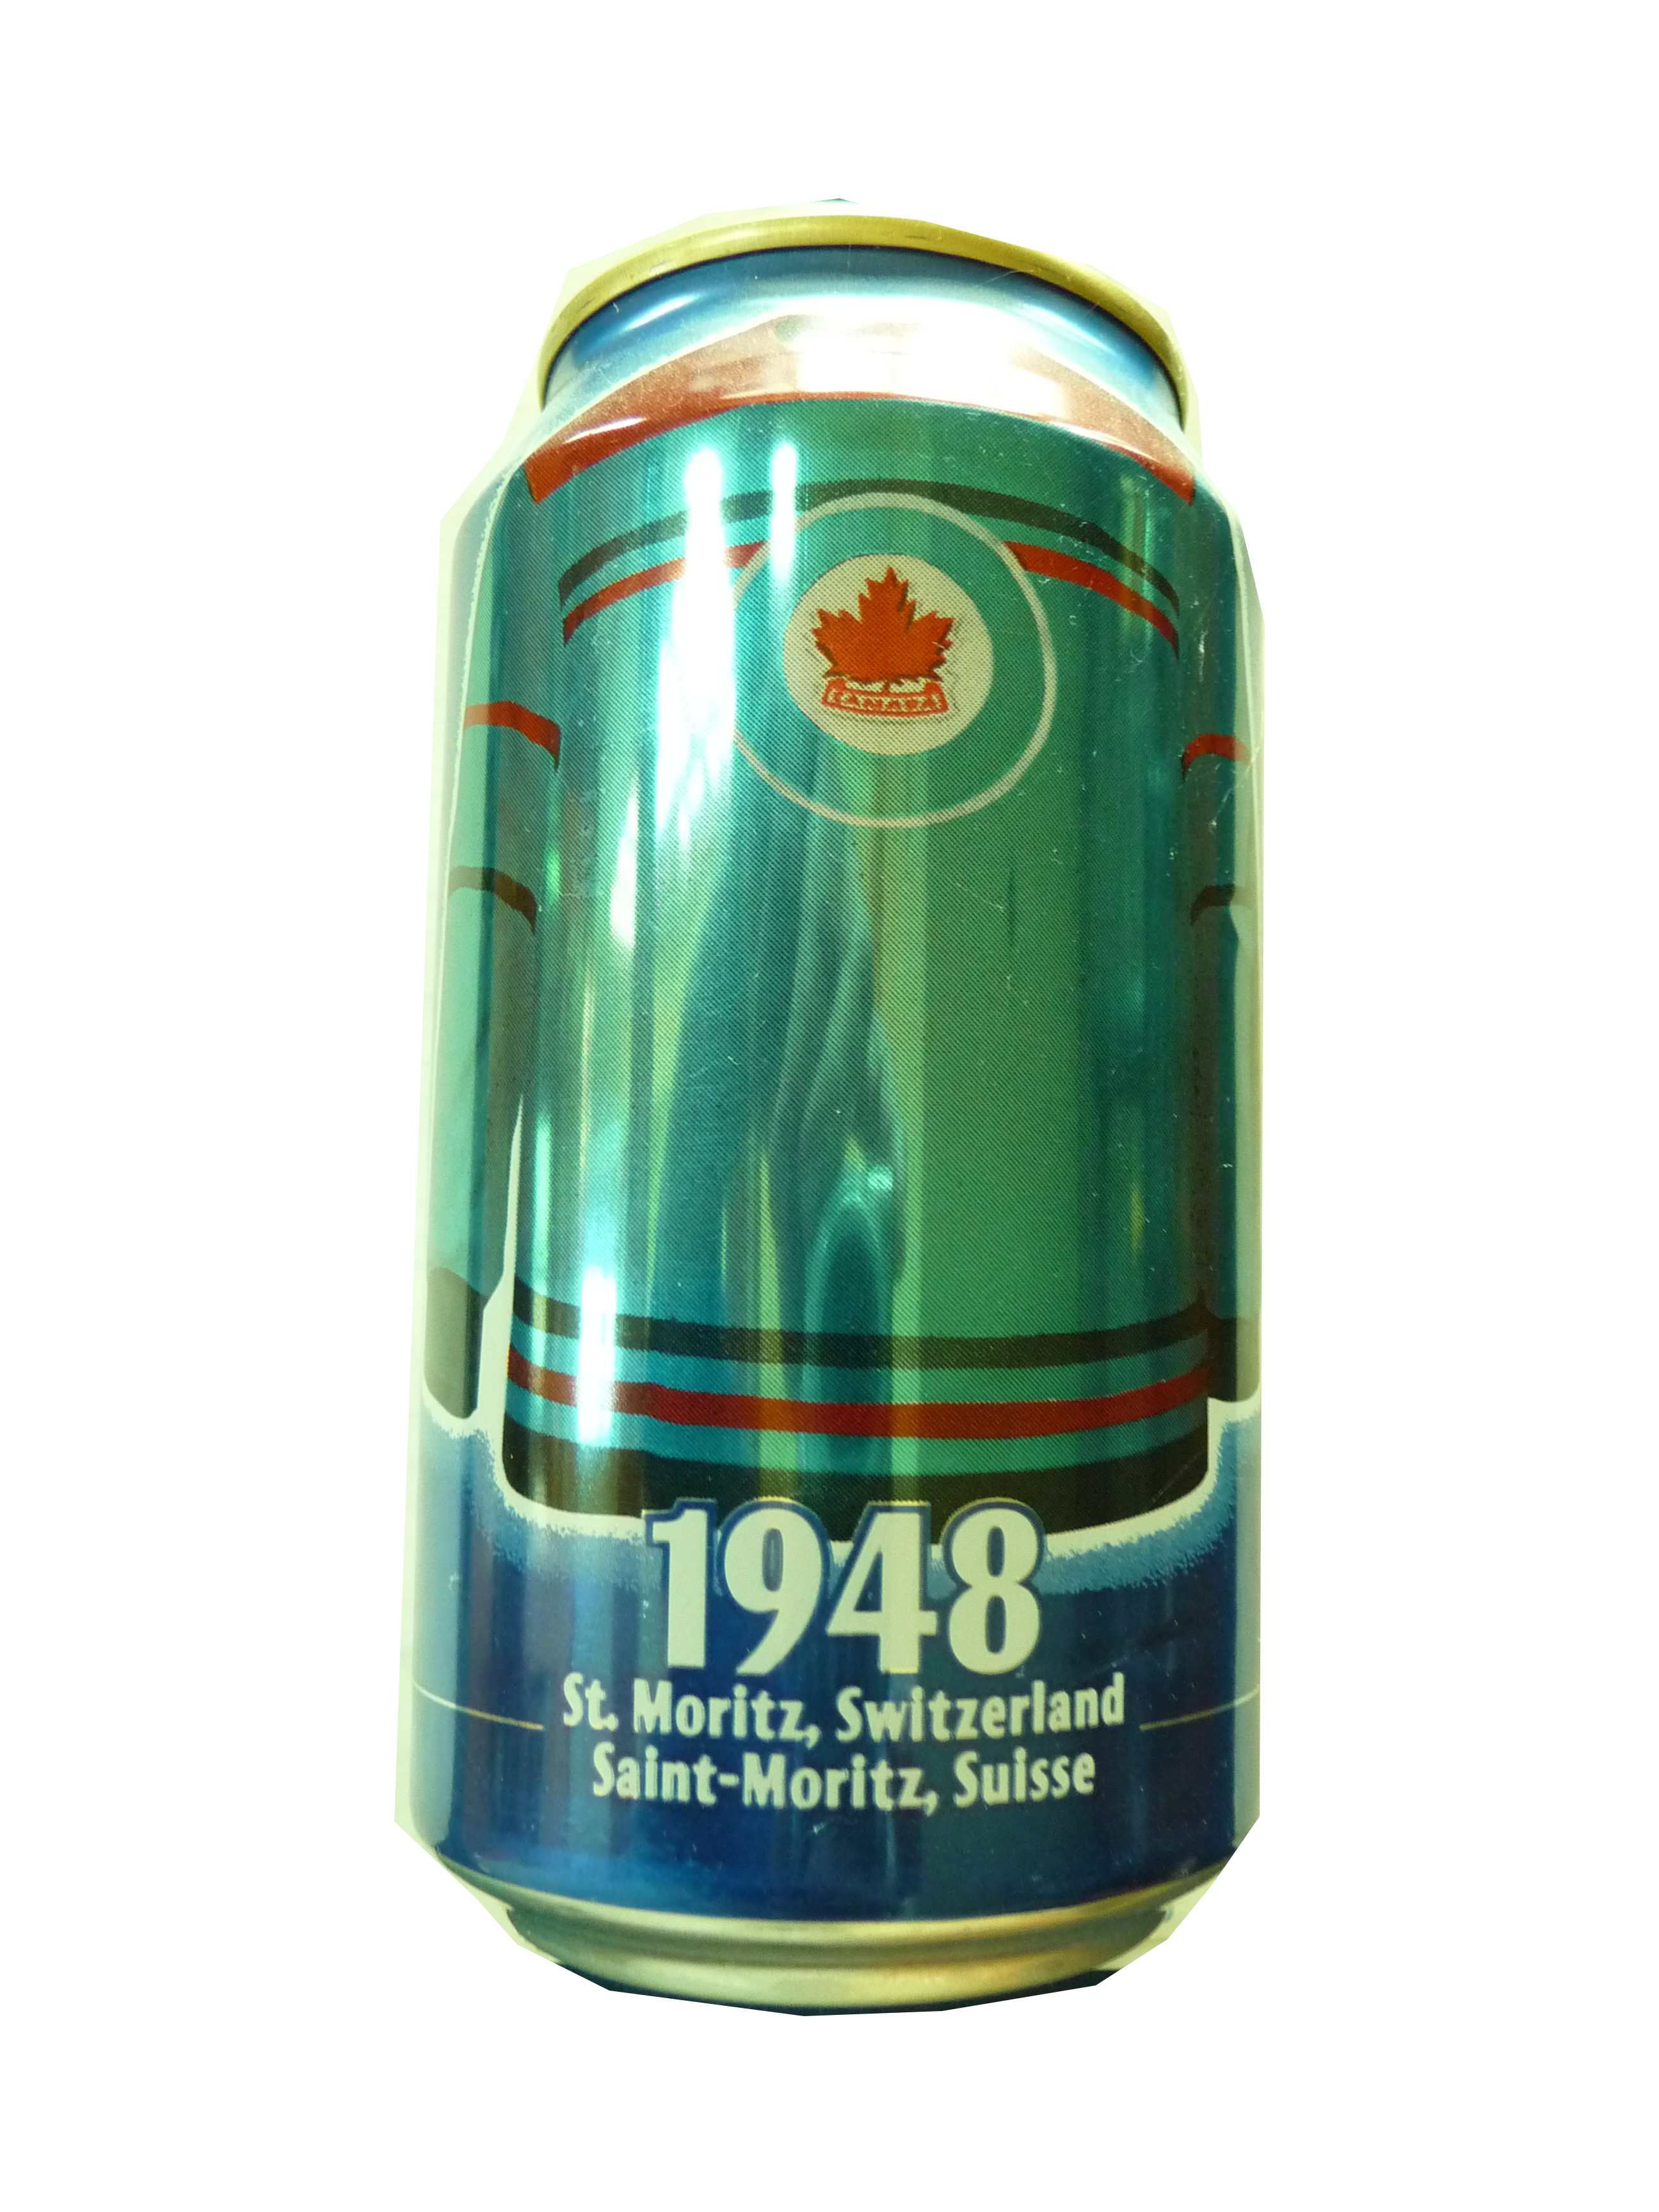 Pepsi Soda Can commemerating RCAF Flyers